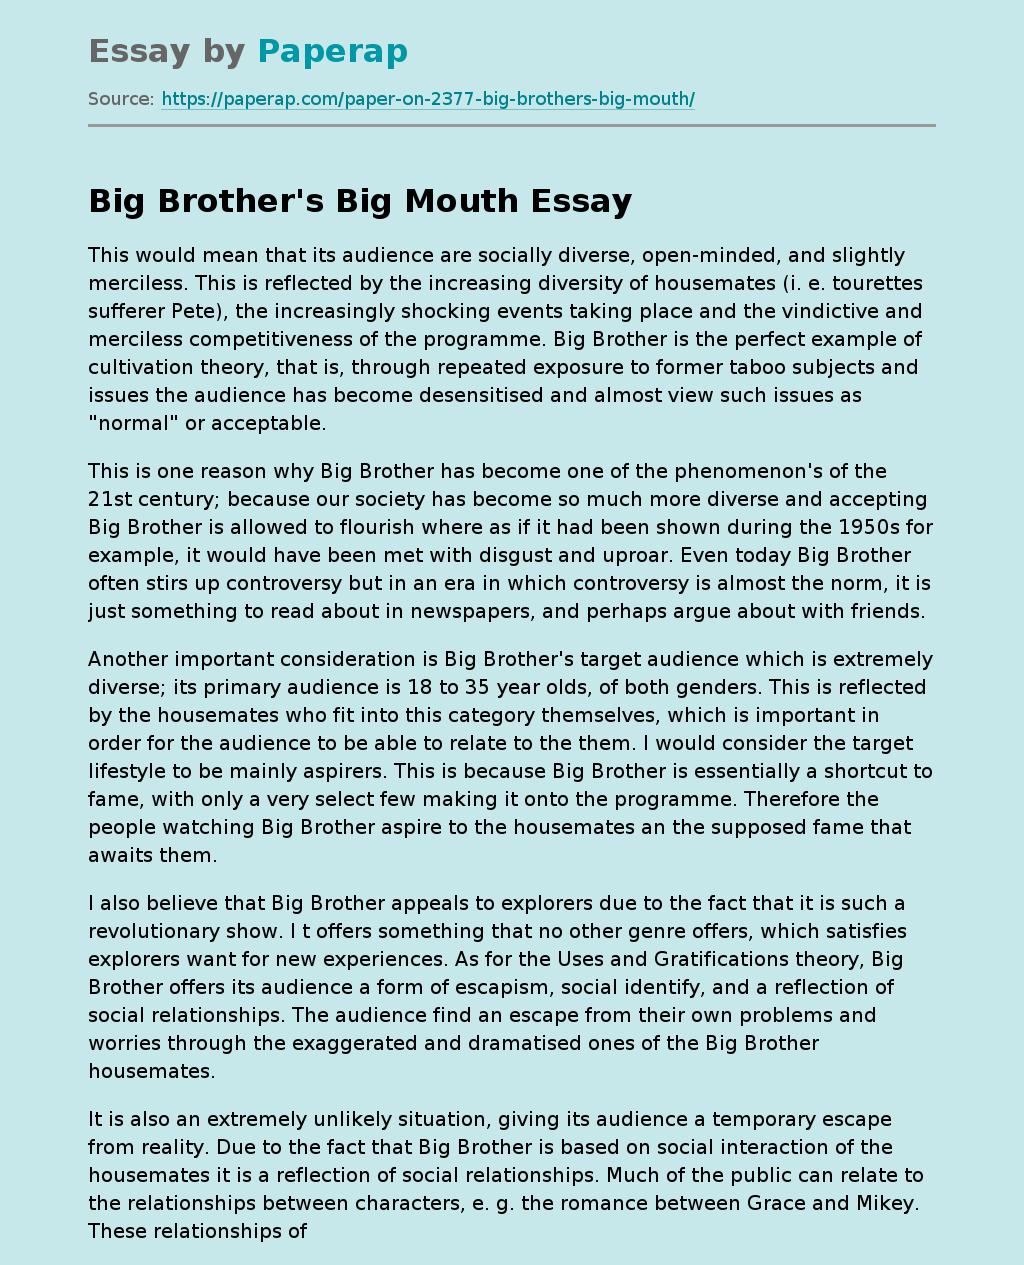 Big Brother's Big Mouth